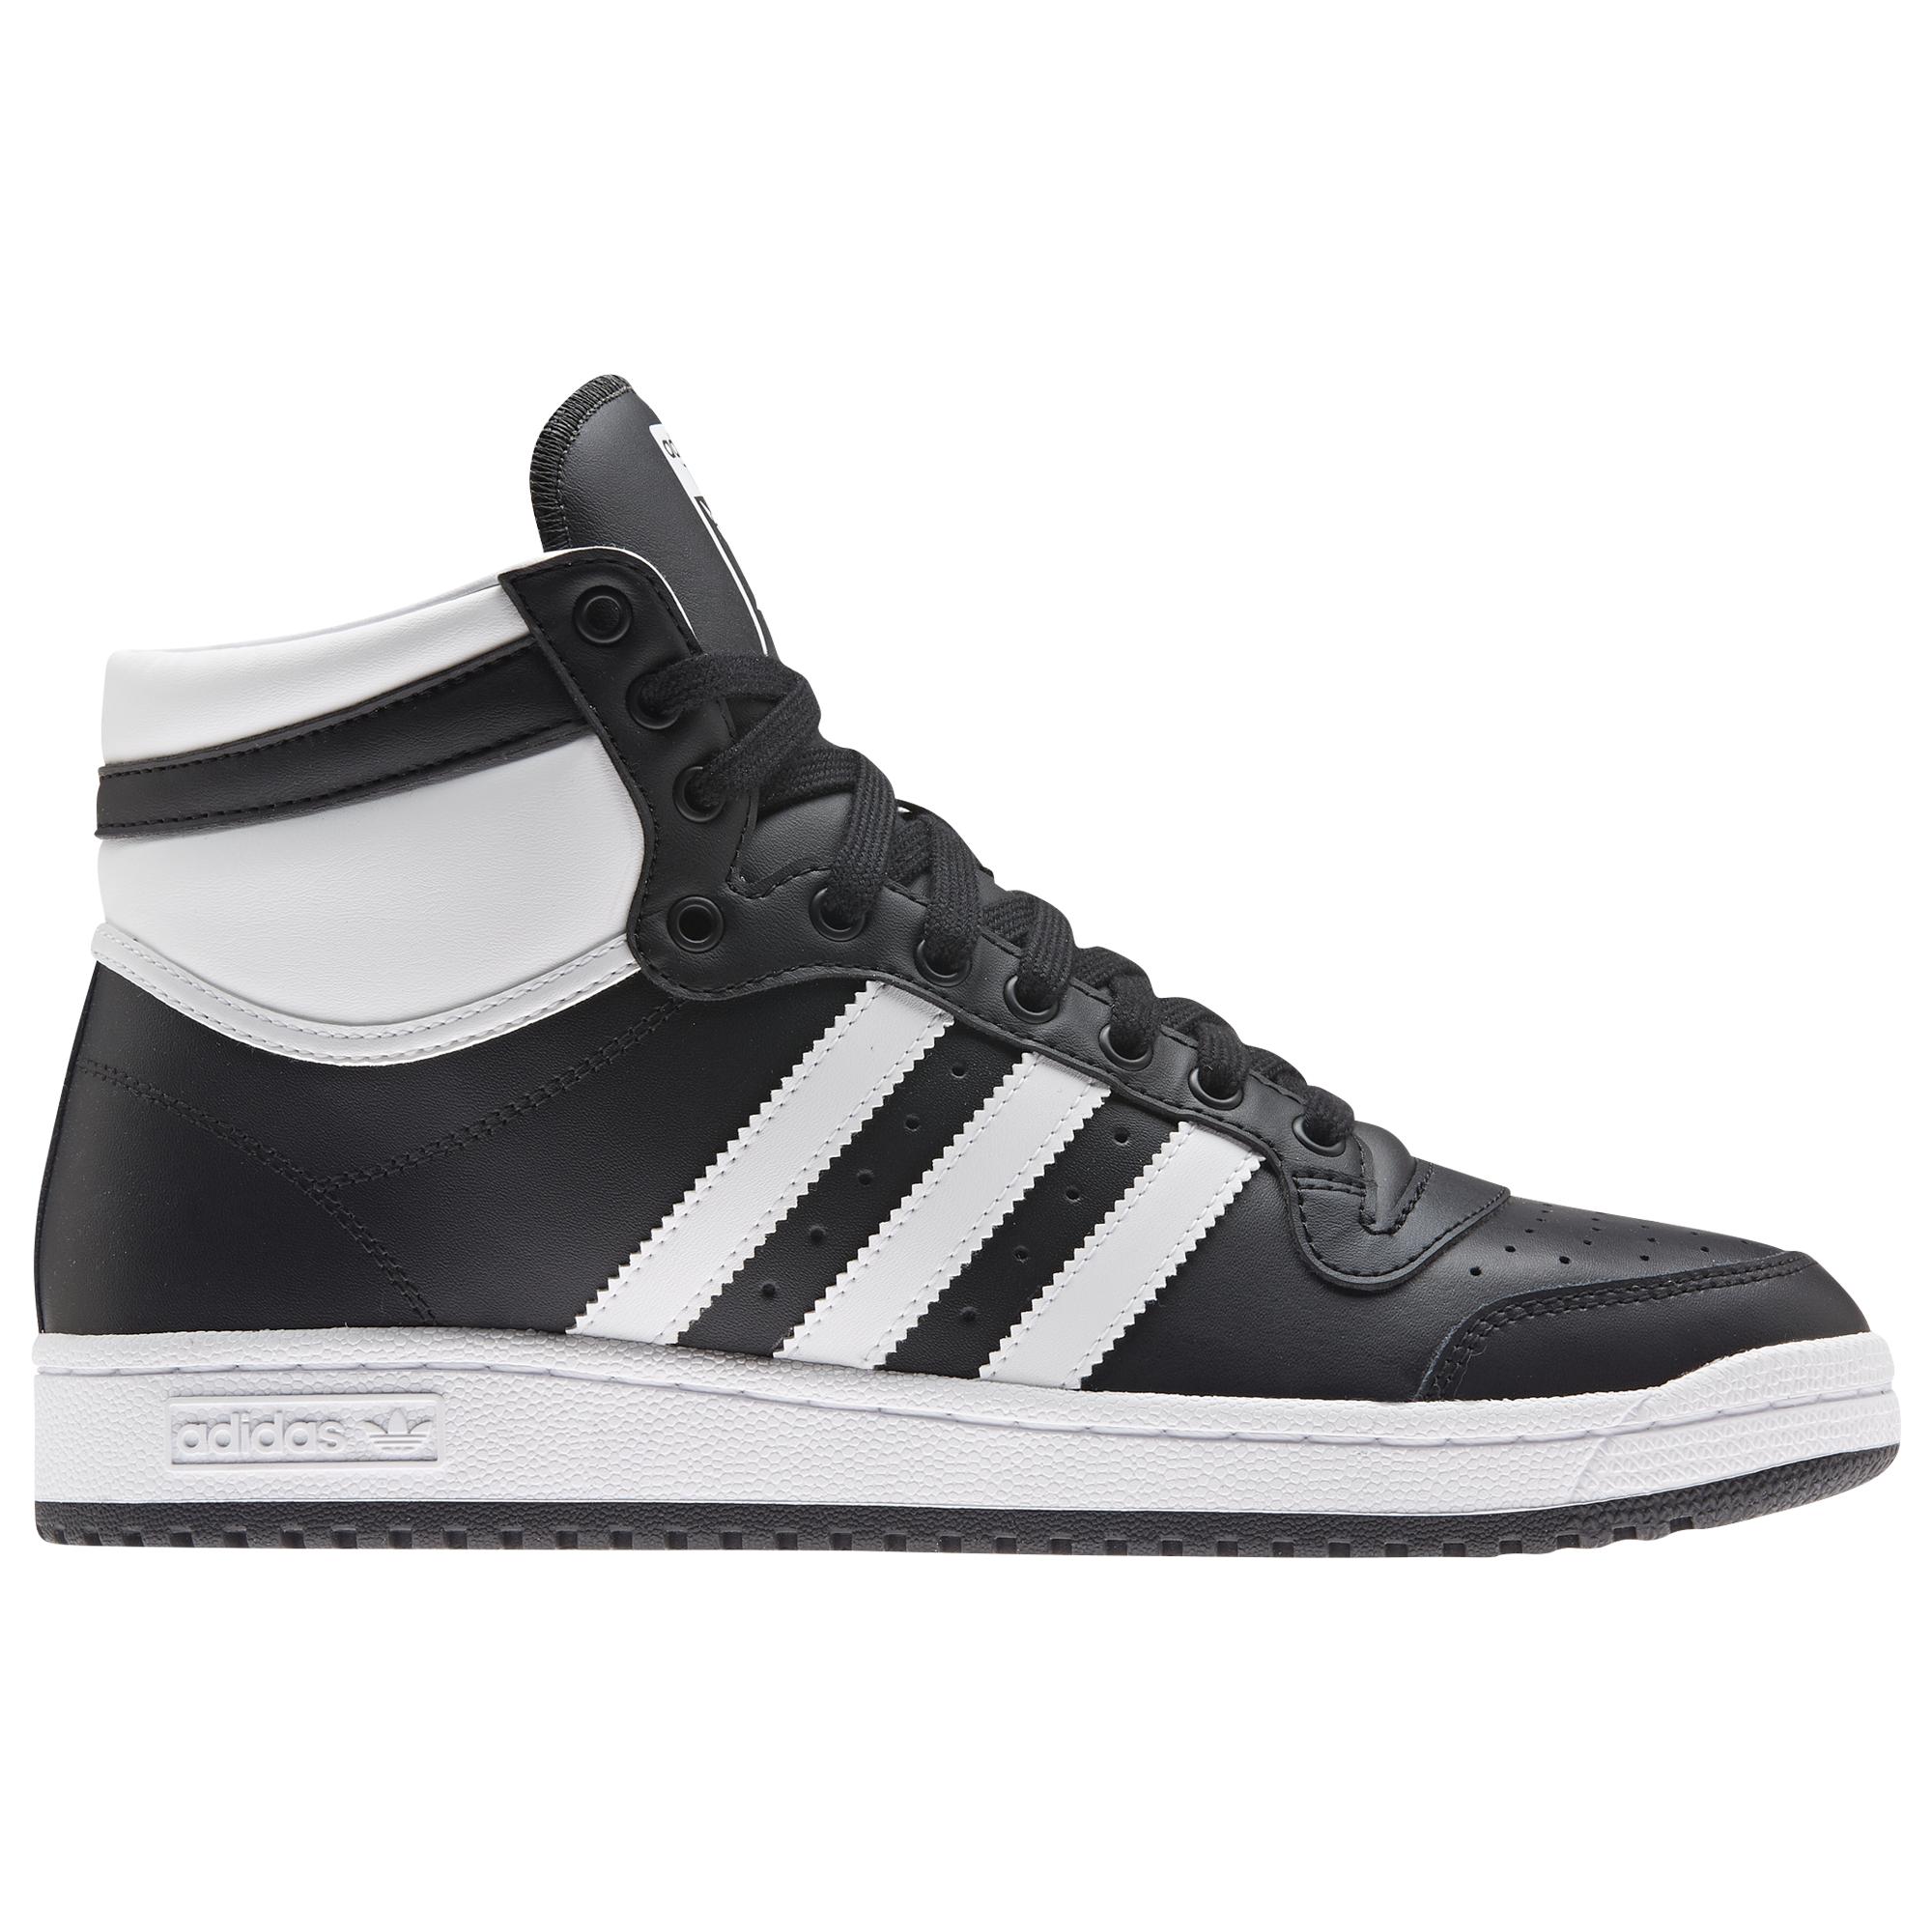 adidas Originals Leather Top Ten Hi - Basketball Shoes in Black/White ...